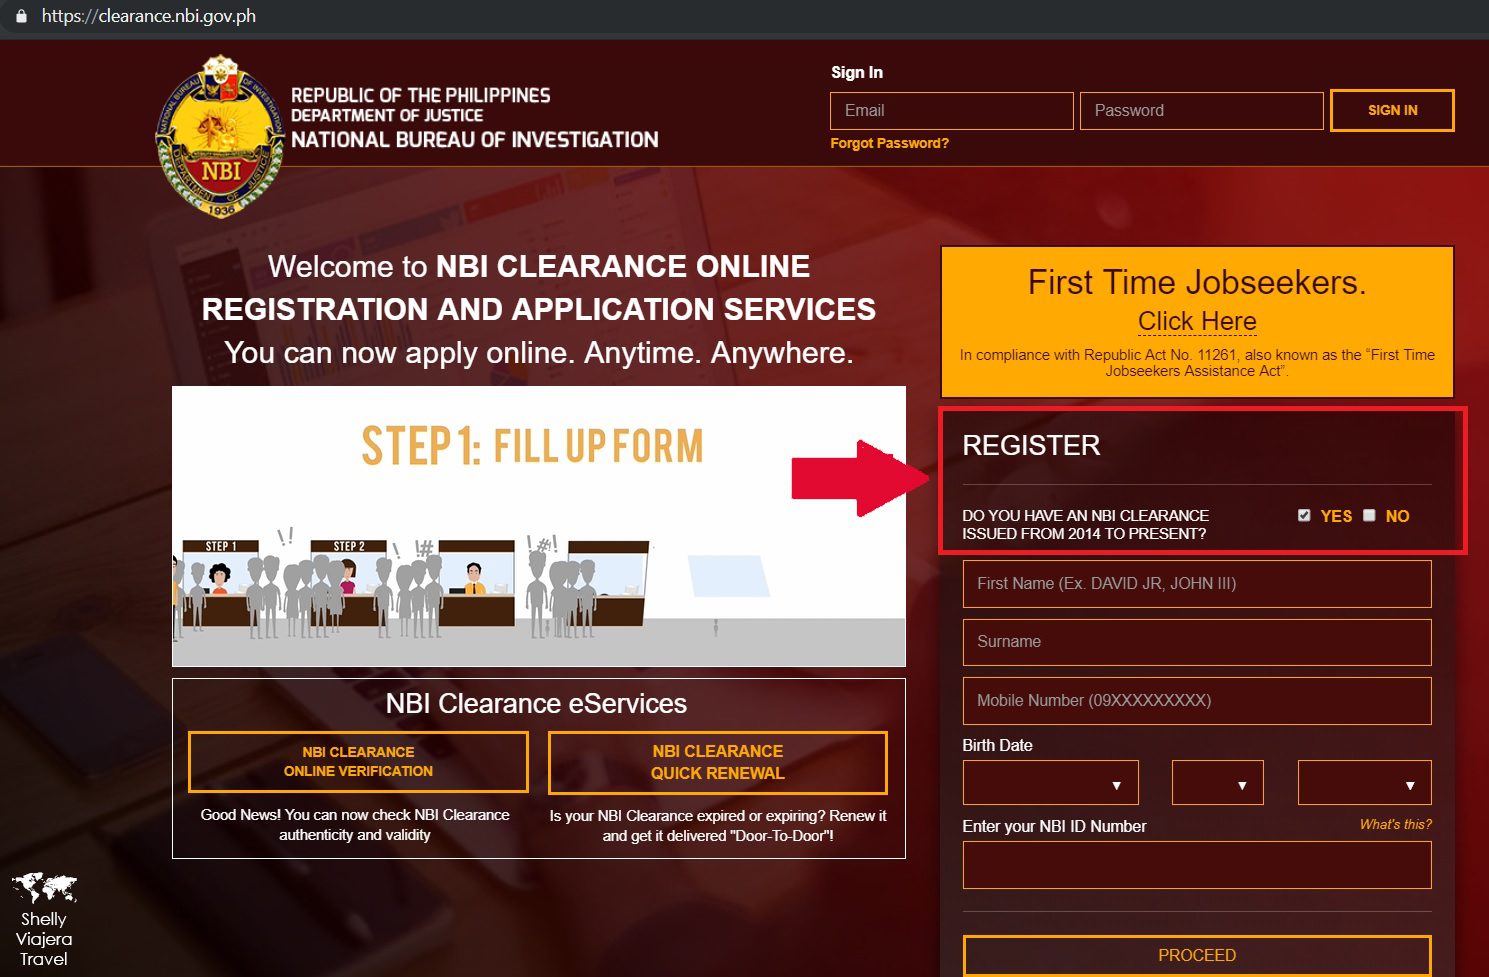 How to Track Nbi Renewal Delivery